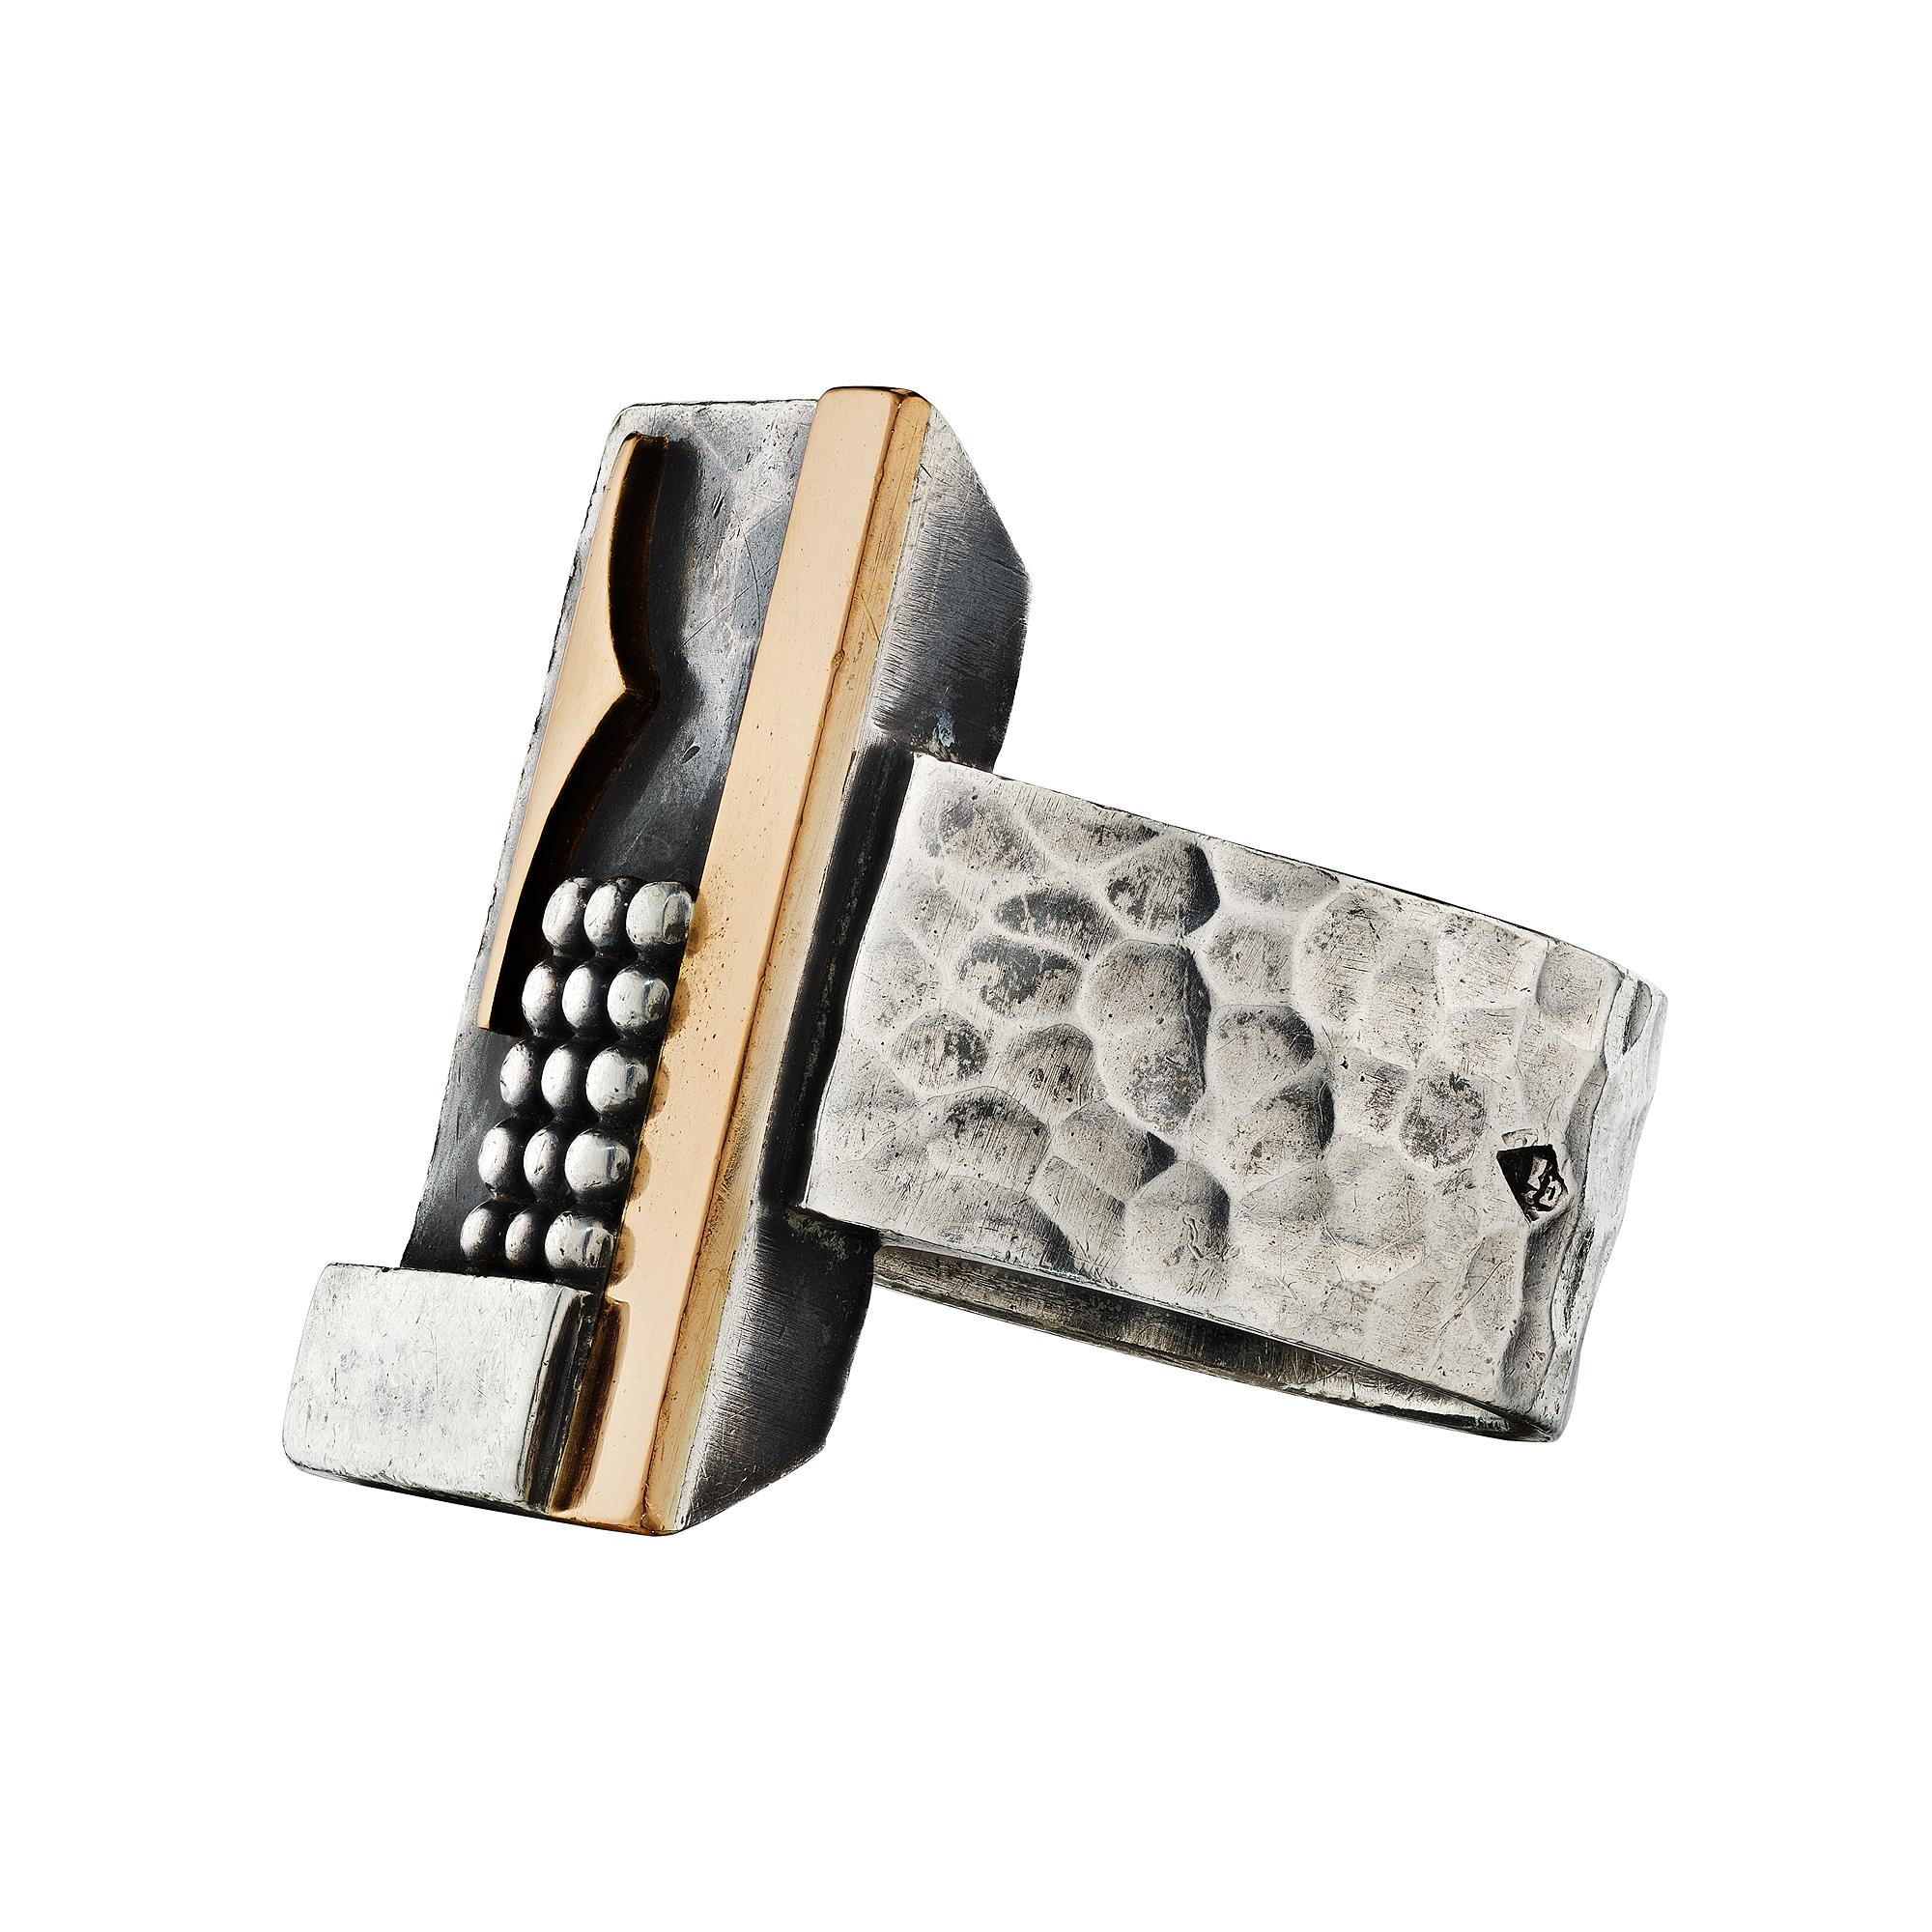 This original Jean Despres Paris sterling silver and 18 karat yellow gold hand hammered modernist ring is wearable 'fine art'.  With a rectangular design resembling a abstract collage, this incredible ring has a one-of-a-kind artistic spirit all its